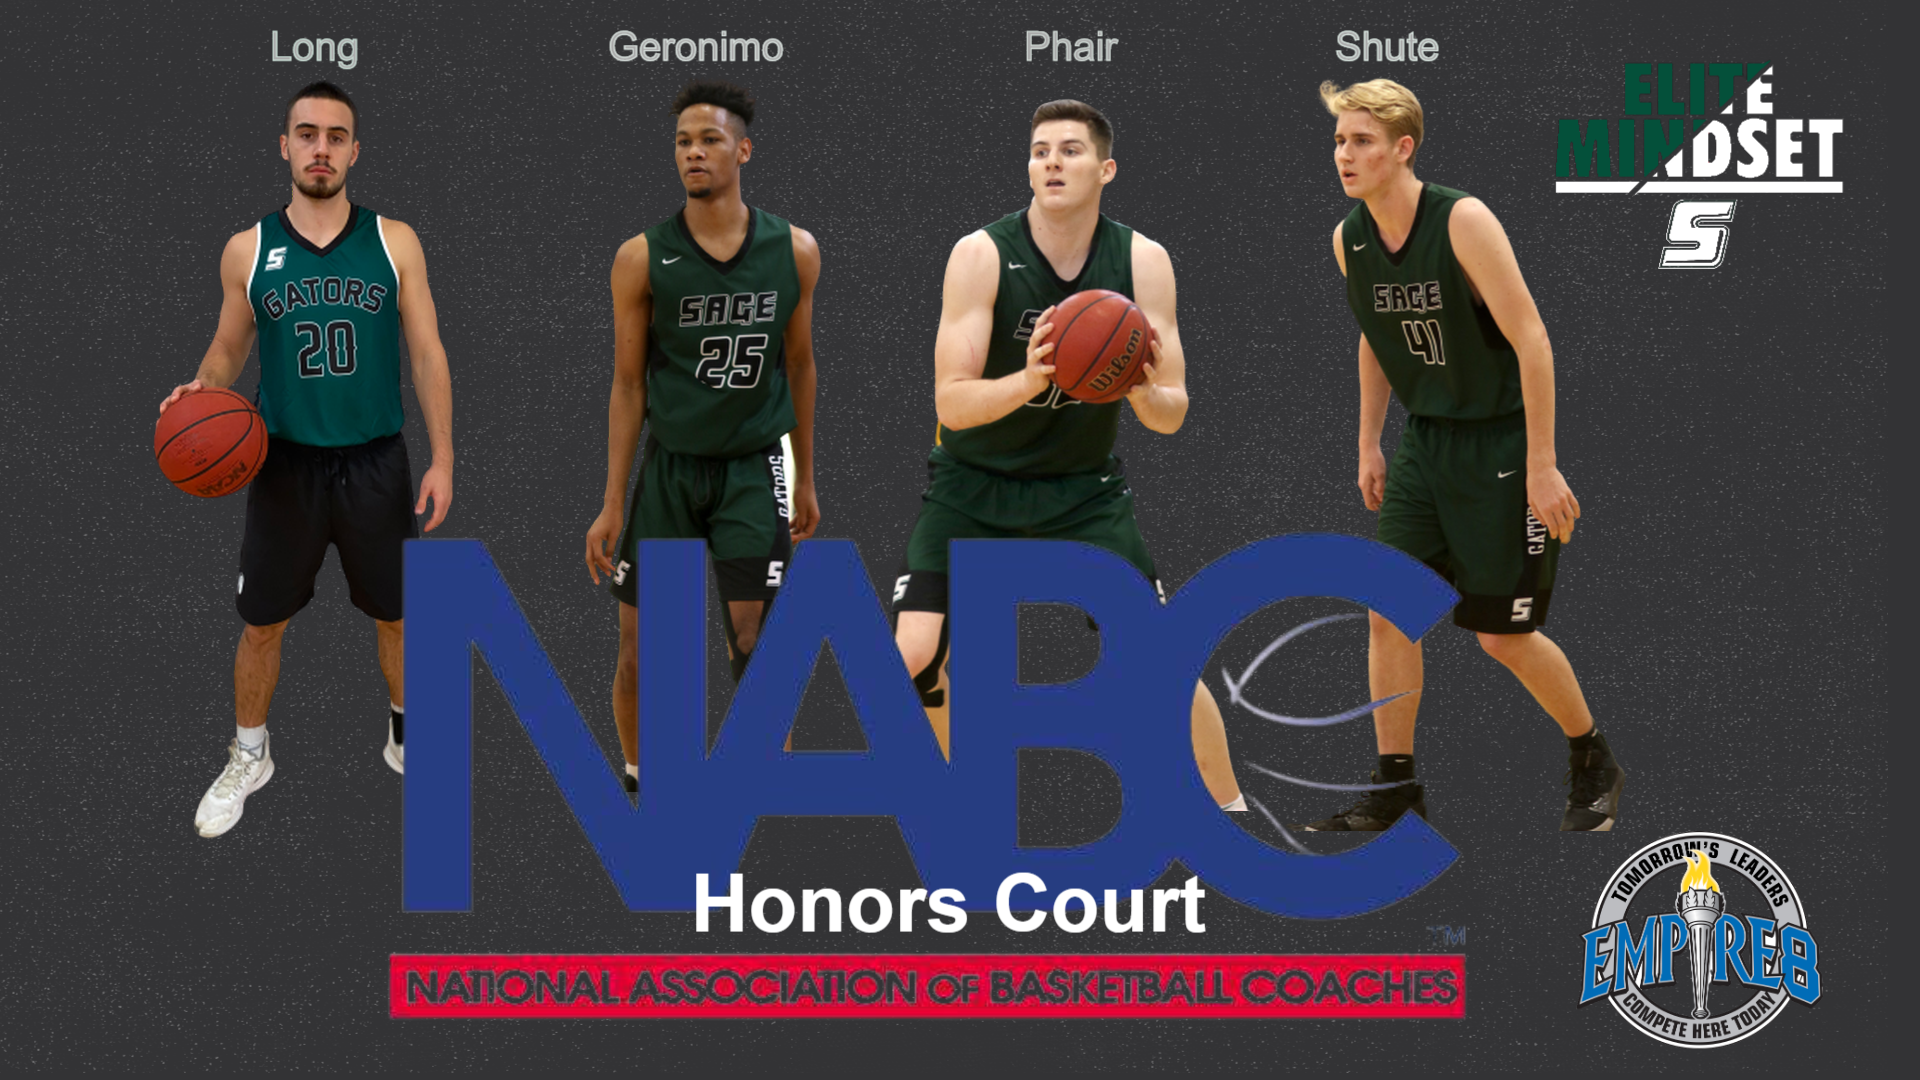 Four RSC Men's basketball players honored by NABC